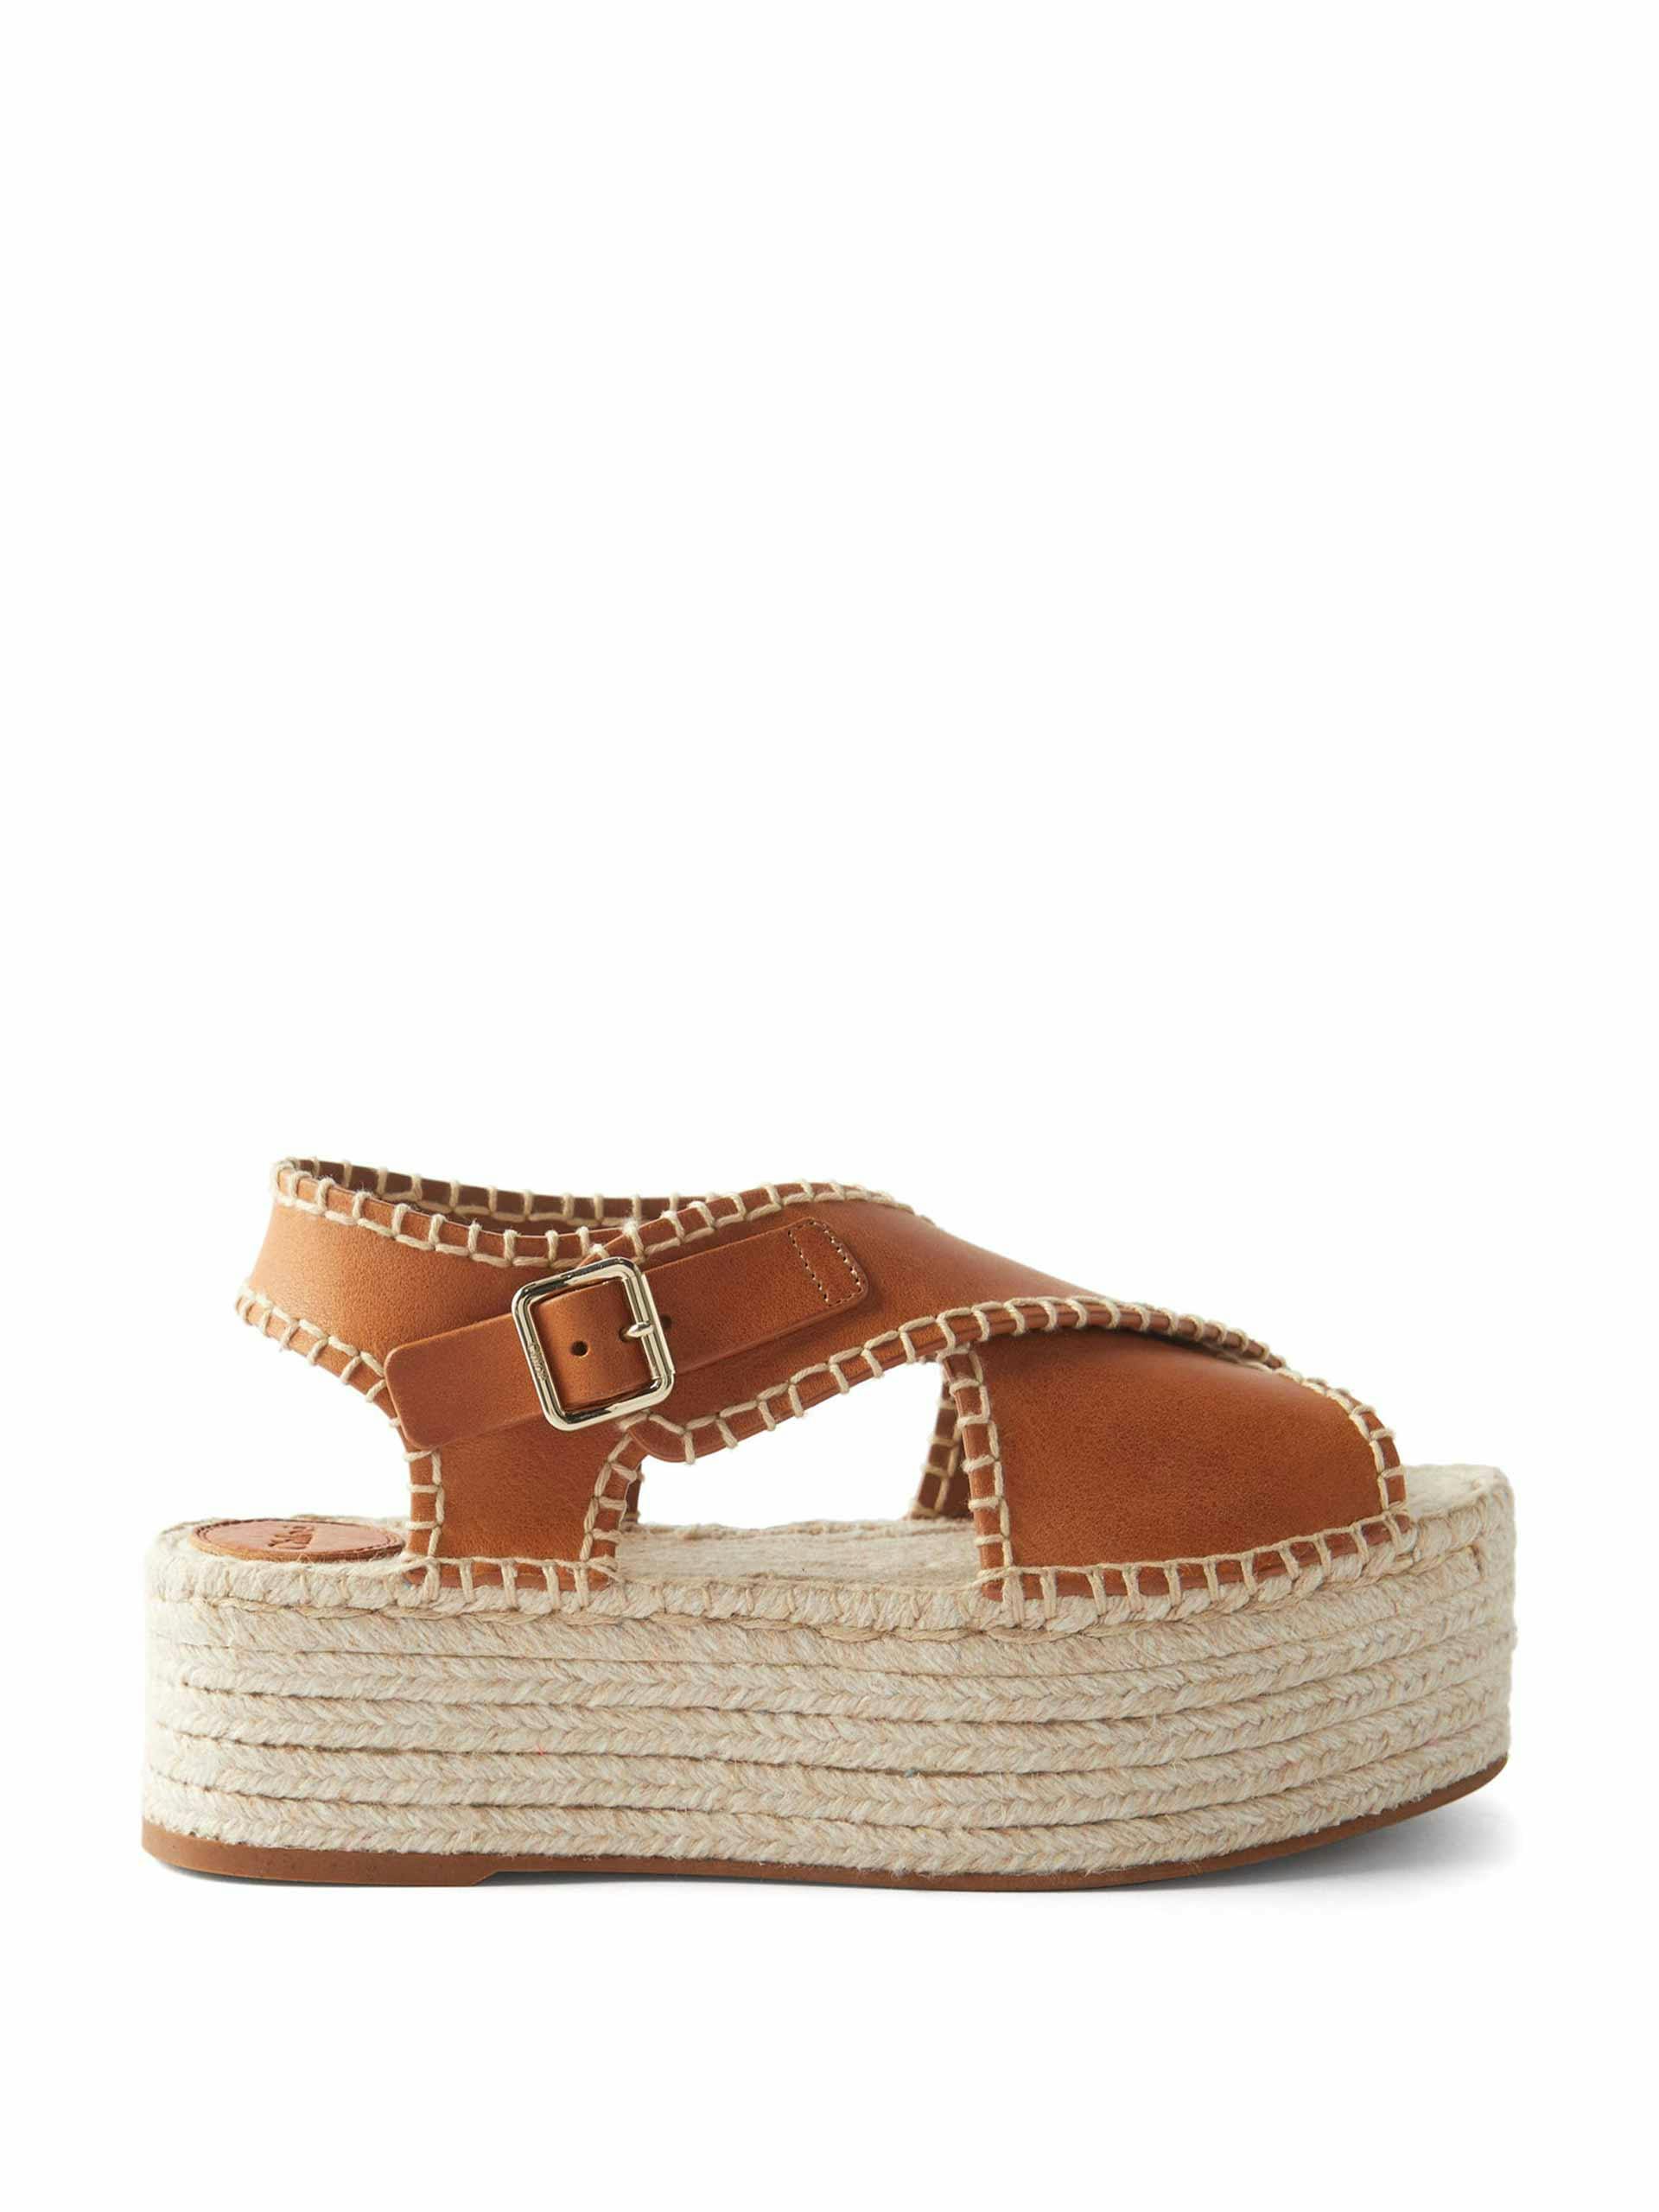 Top-stitched brown leather espadrille wedges